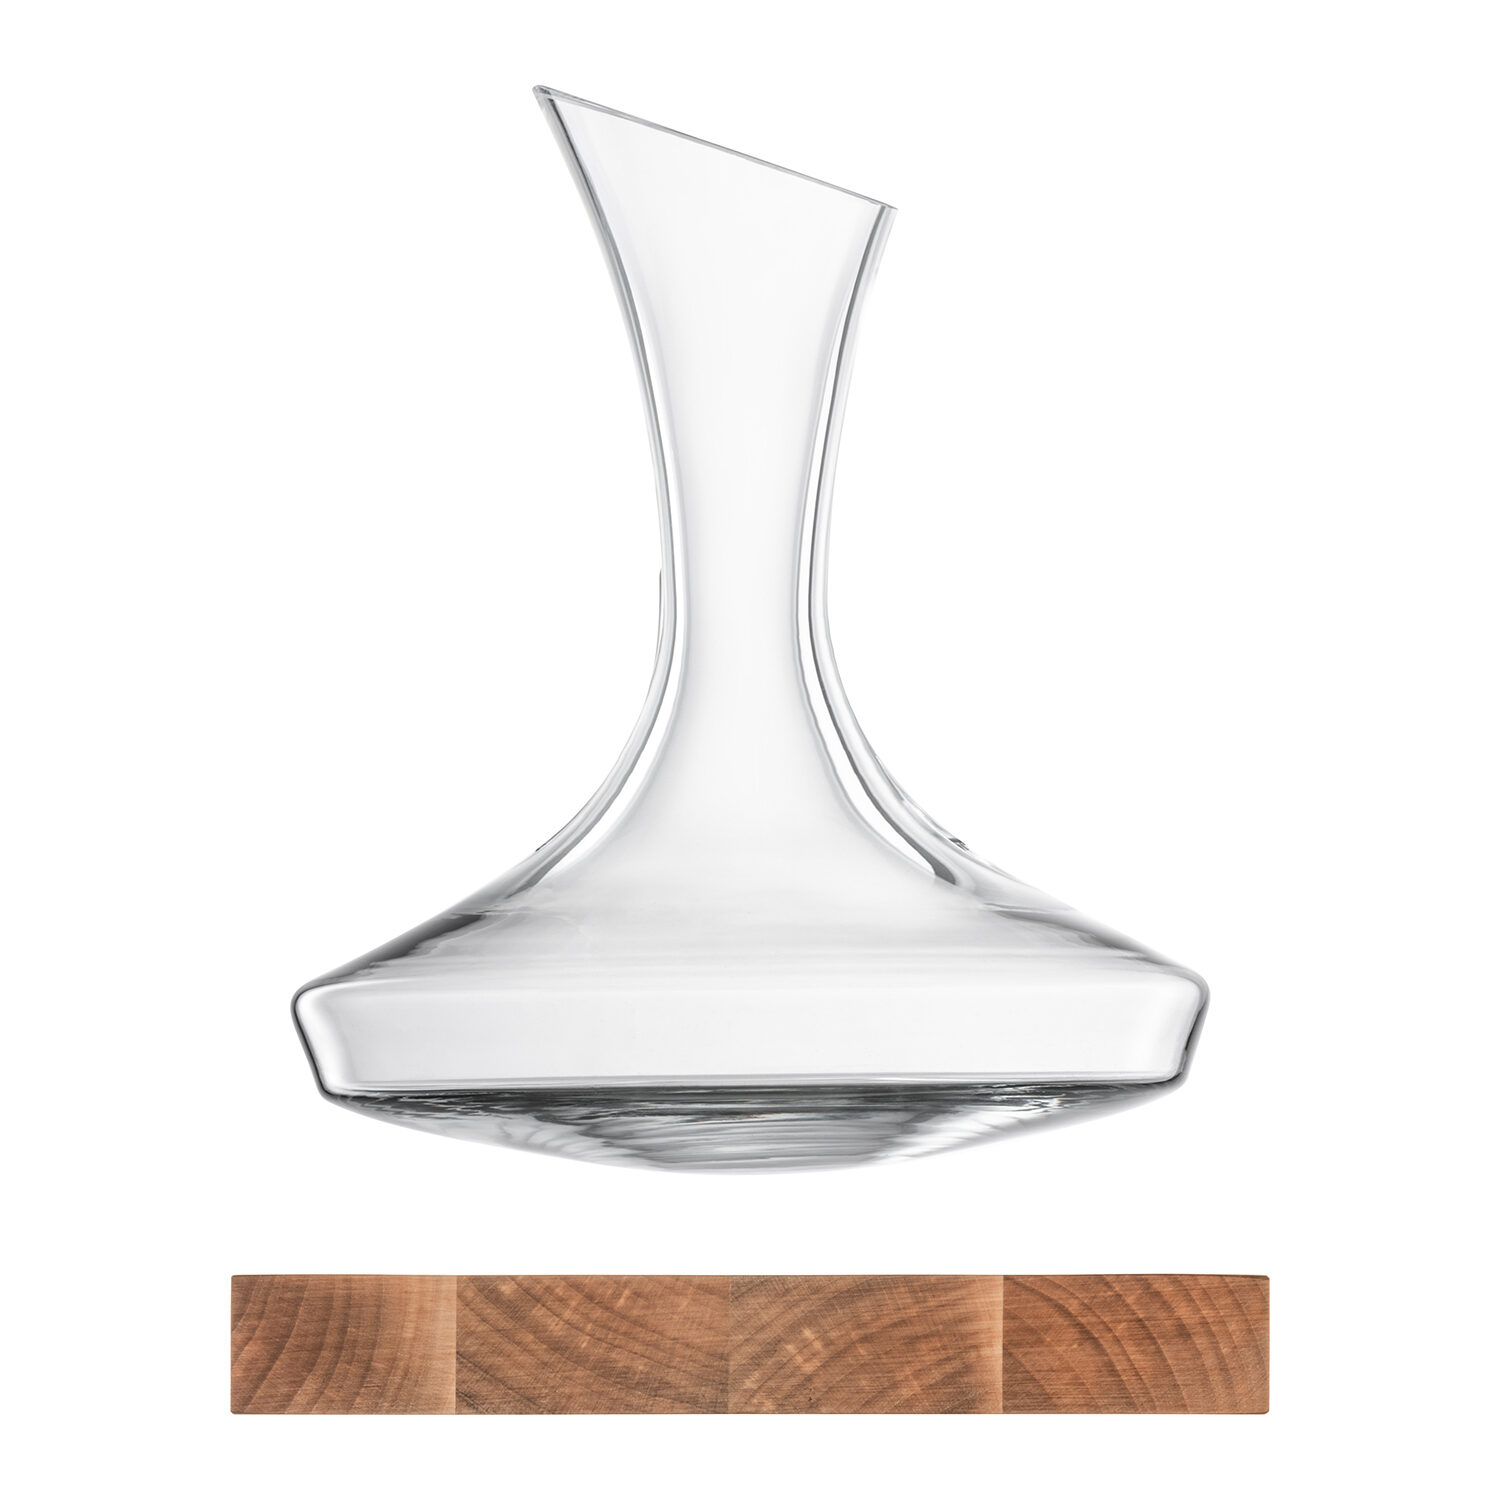 EDITION WOOD decanter on a wooden base